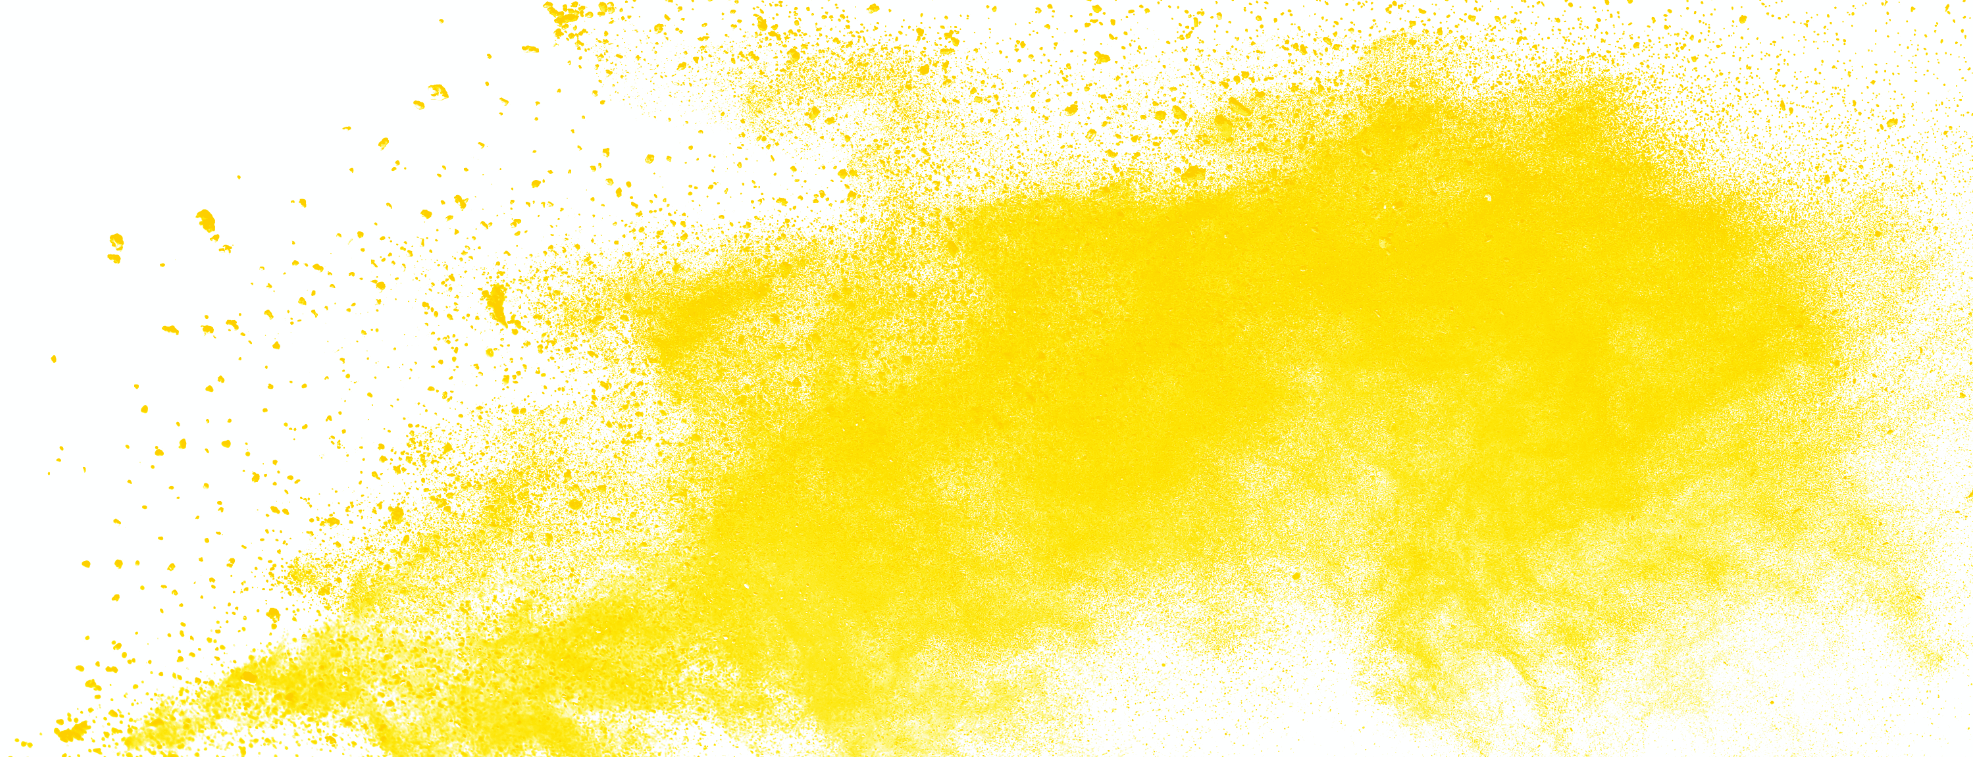 Rich yellow paint over white background